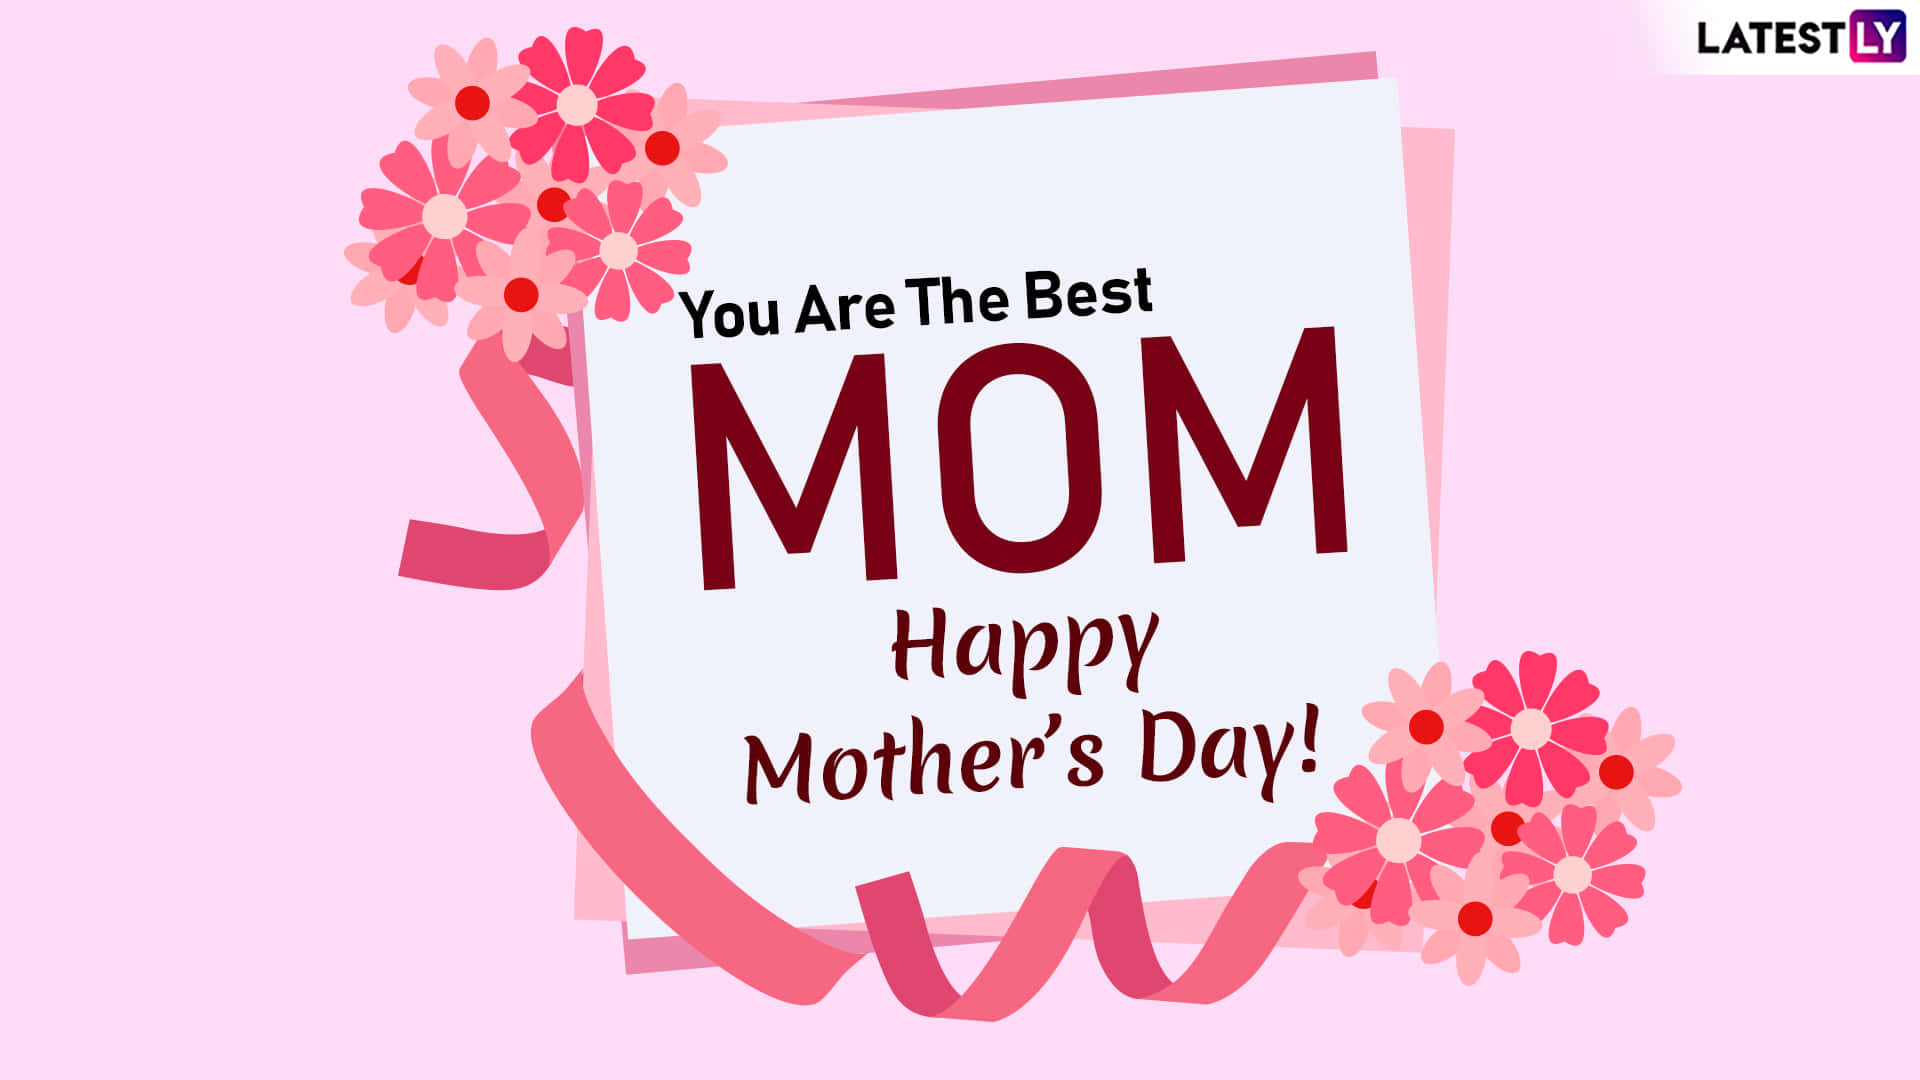 Happy Mother's Day Wishes For Mom